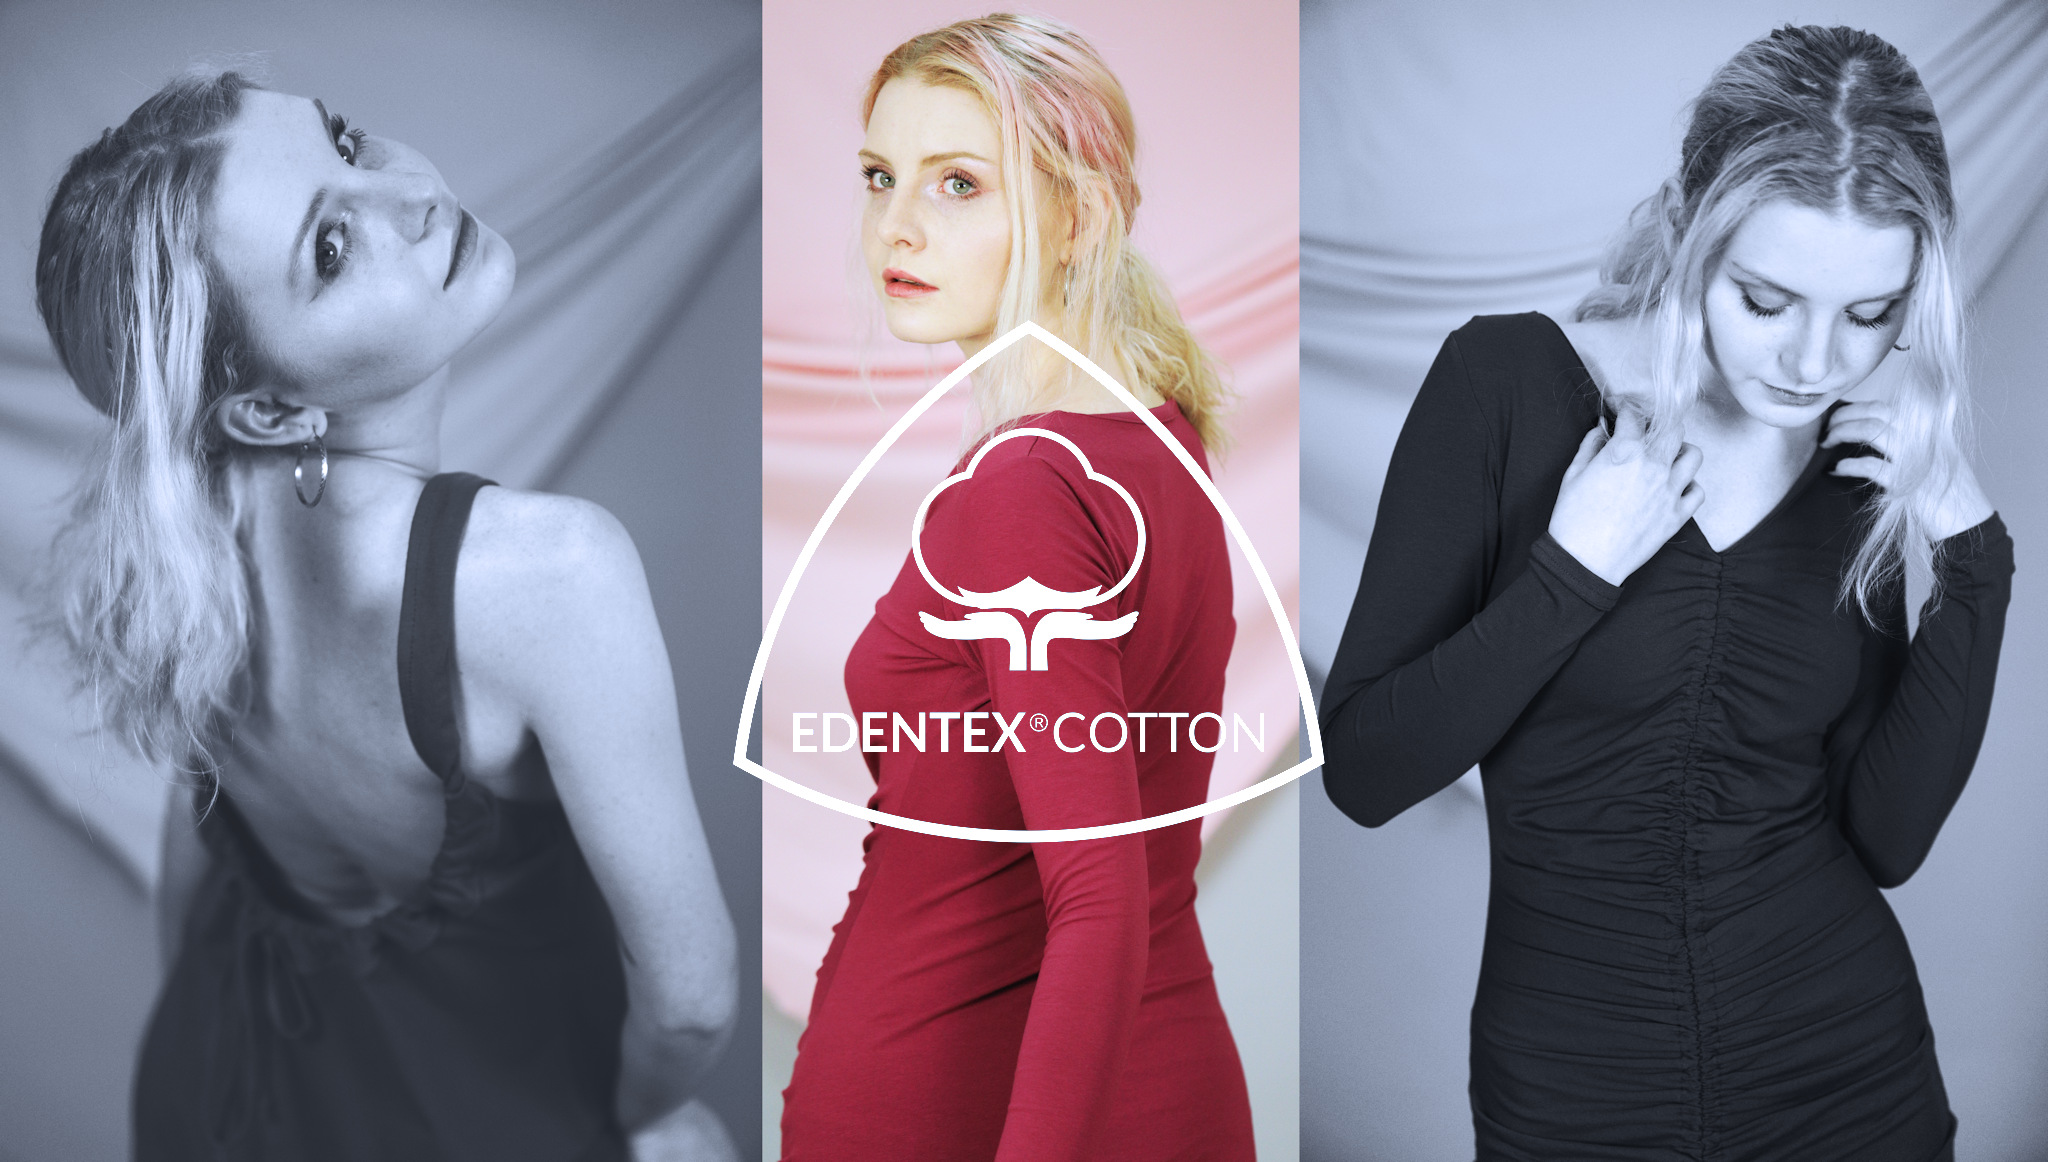 Created only for demanding manufacturers, EDENTEX® single jersey fabrics are used in production of quality children clothes, sportswear, pregnancy clothes, underwear and wherever comfort and elegance are valued and desired